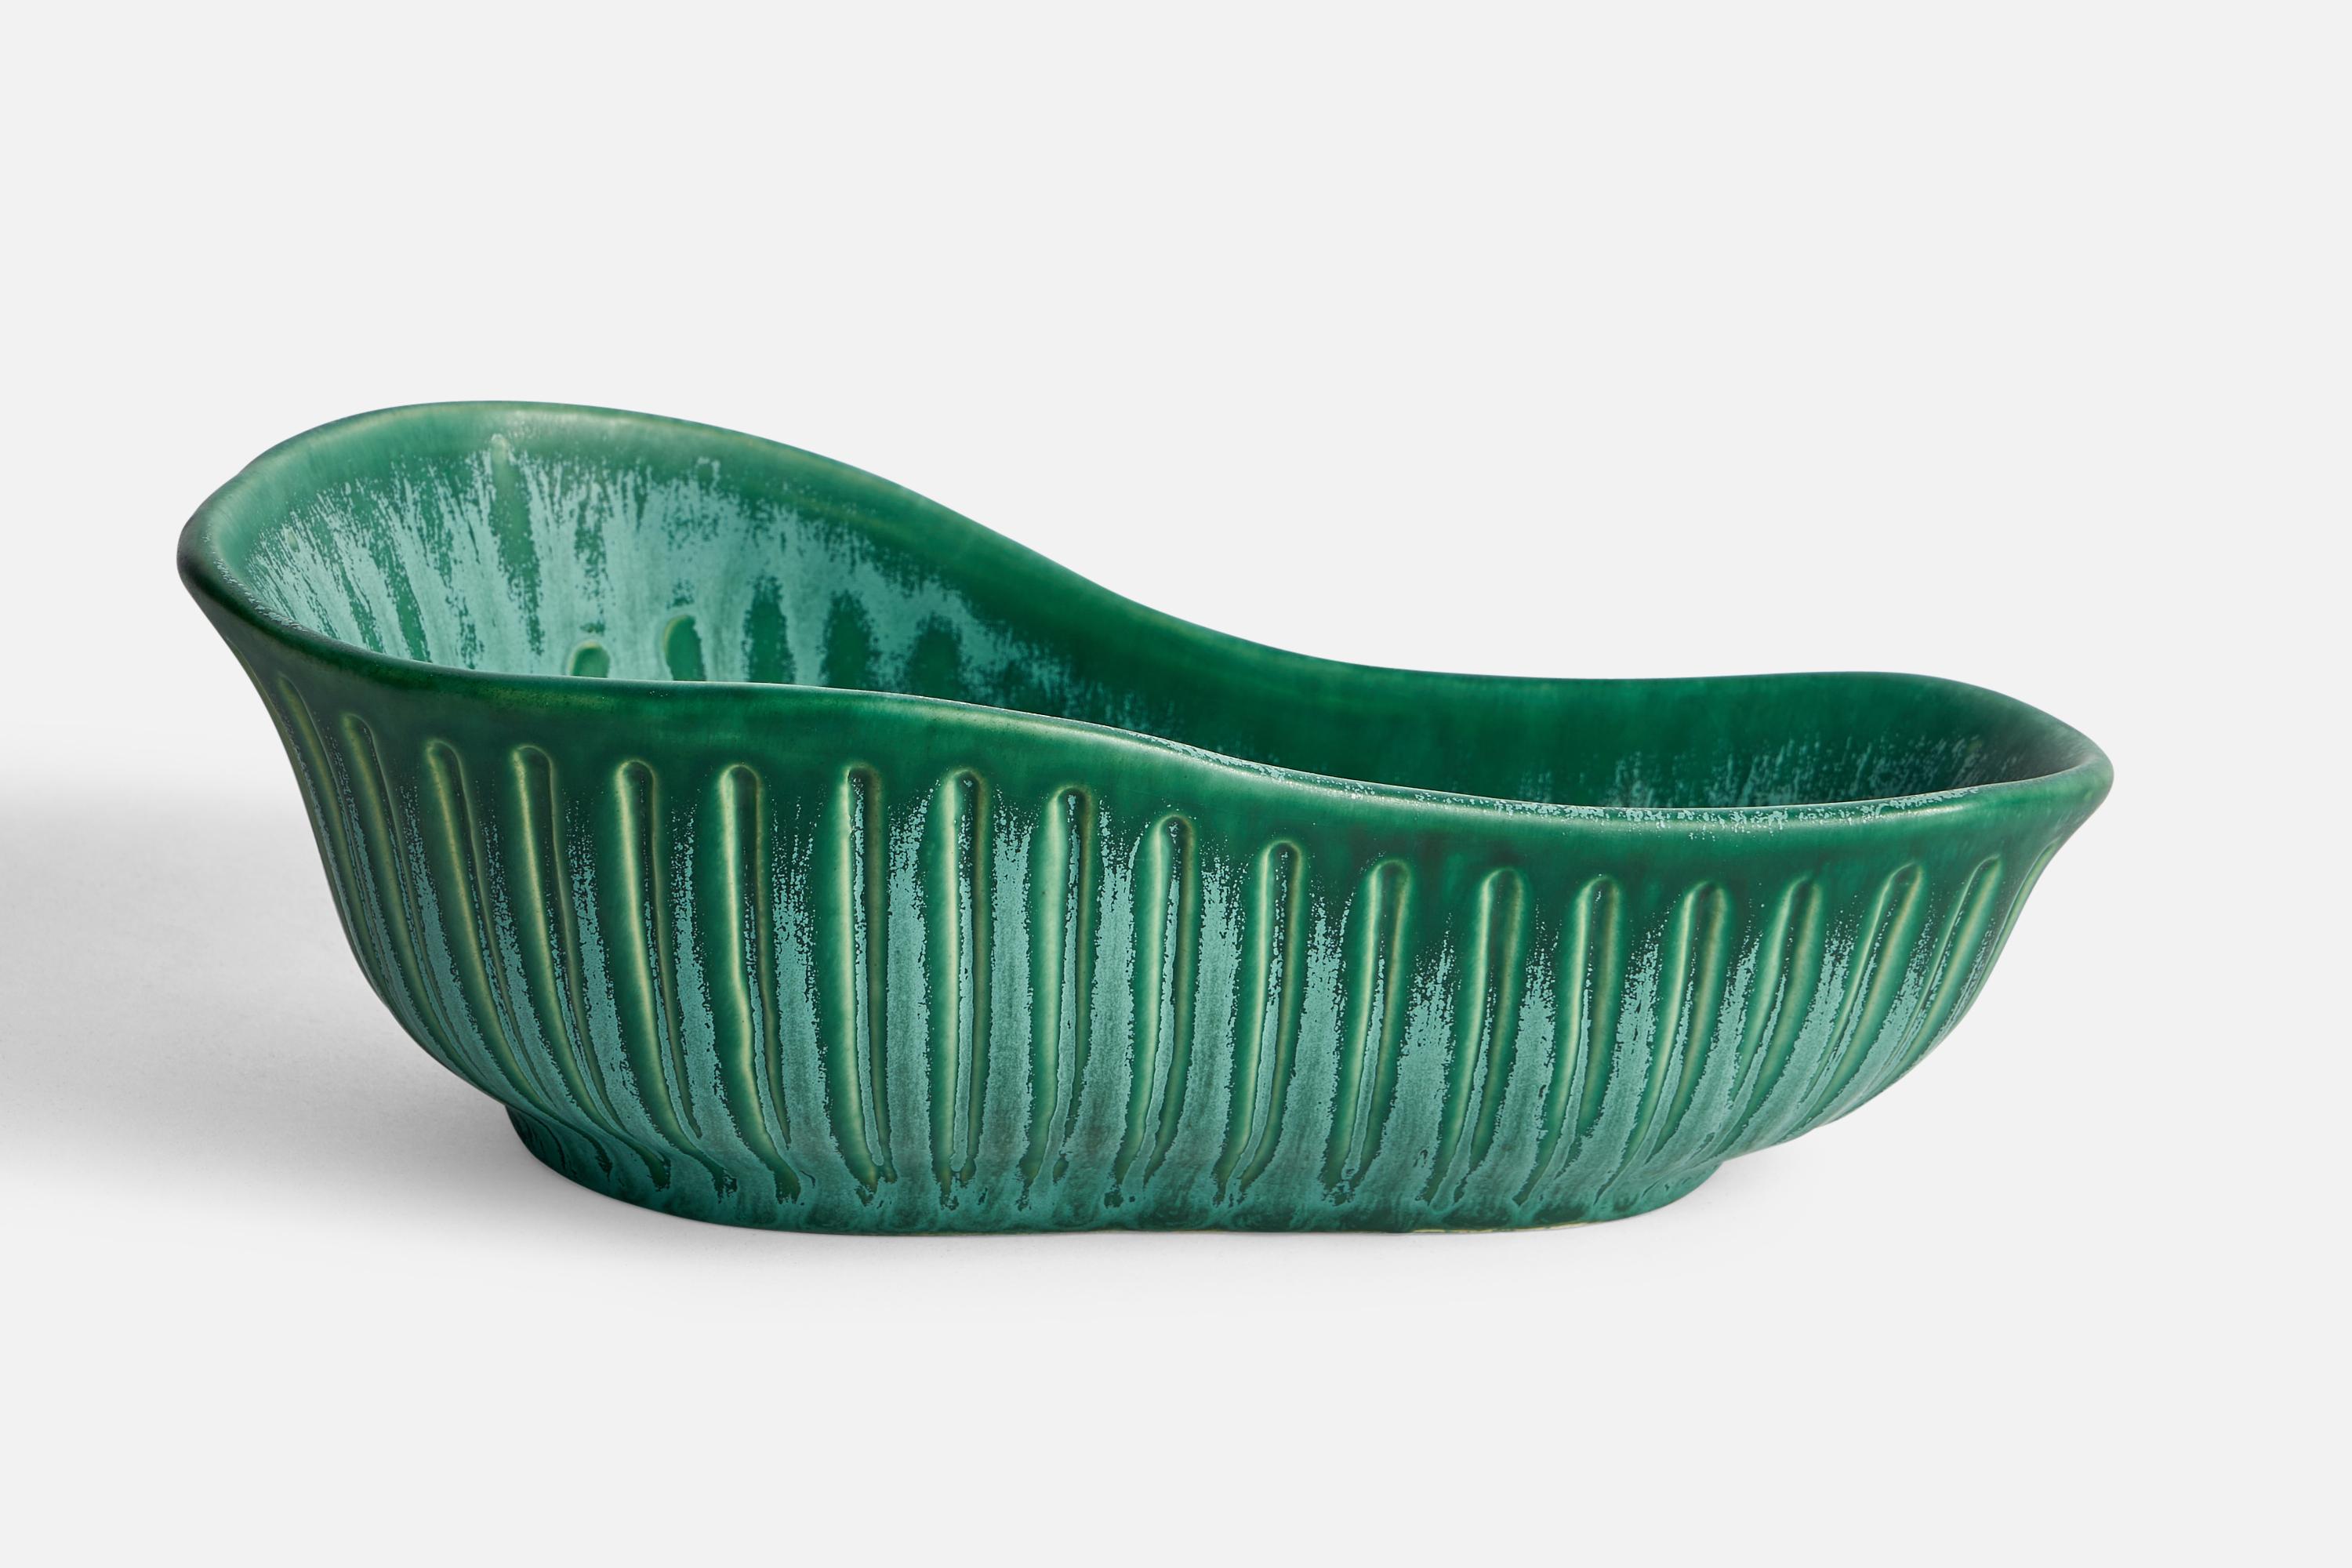 A green-glazed fluted bowl designed by Ewald Dahlskog and produced by Bo Fajans, Sweden, 1930s.